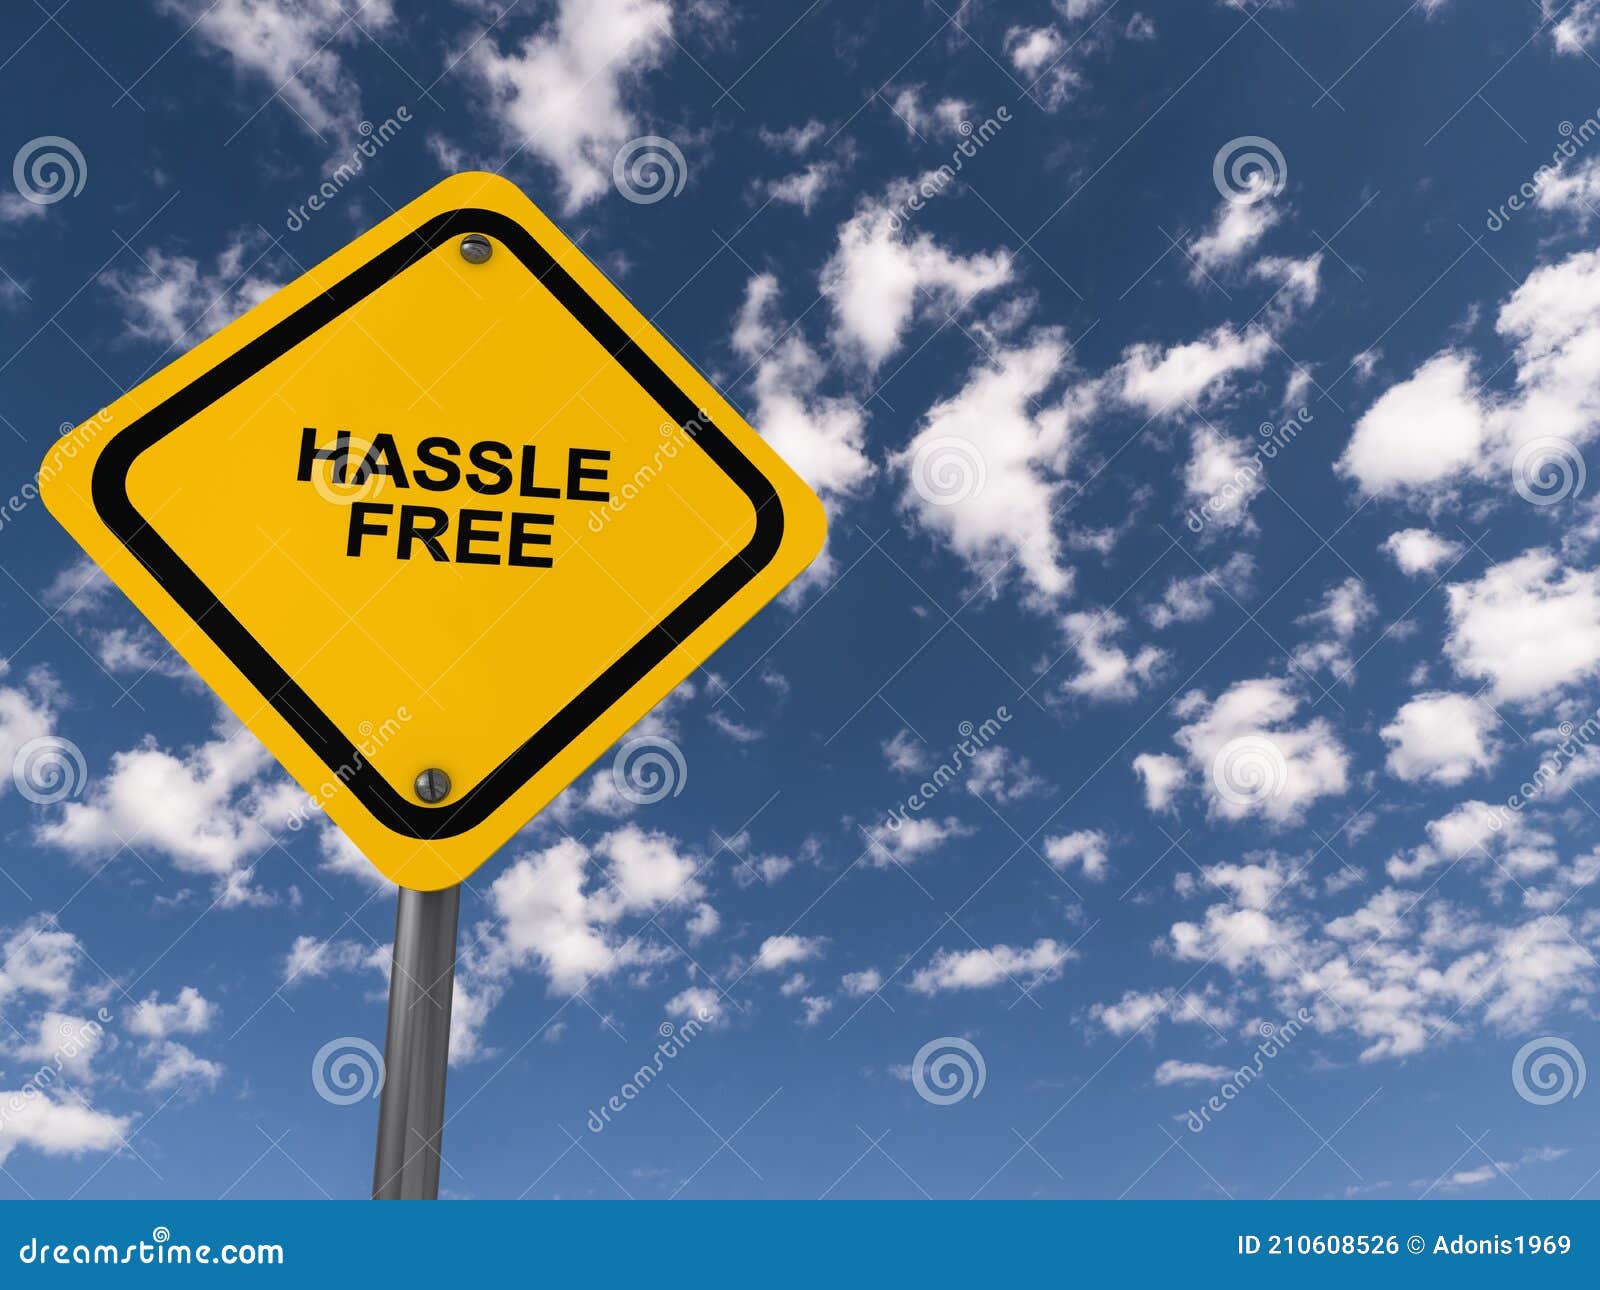 hassle free traffic sign